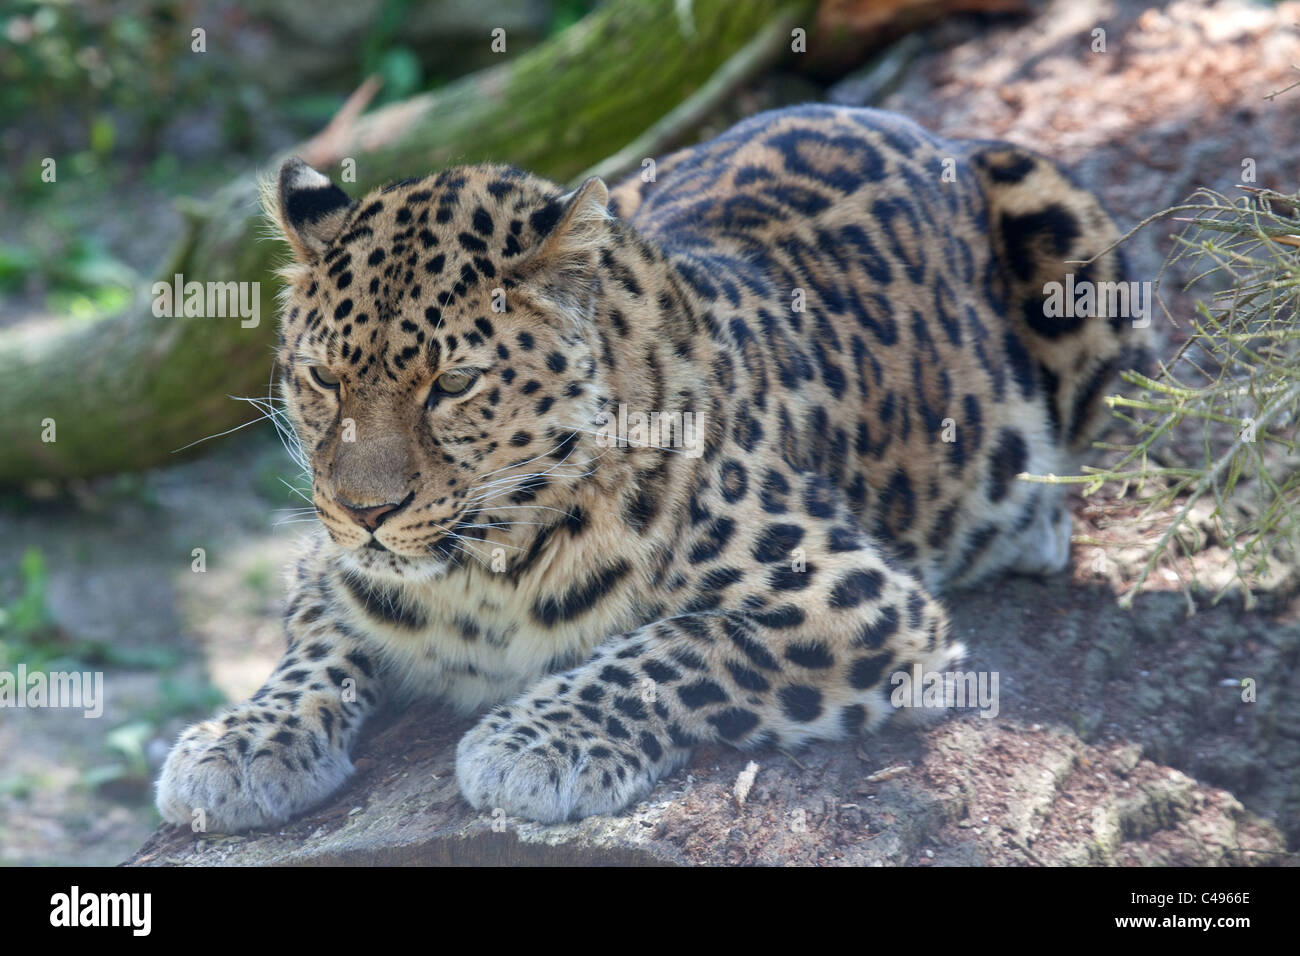 An Amur Leopard lying on a branch of a tree Stock Photo